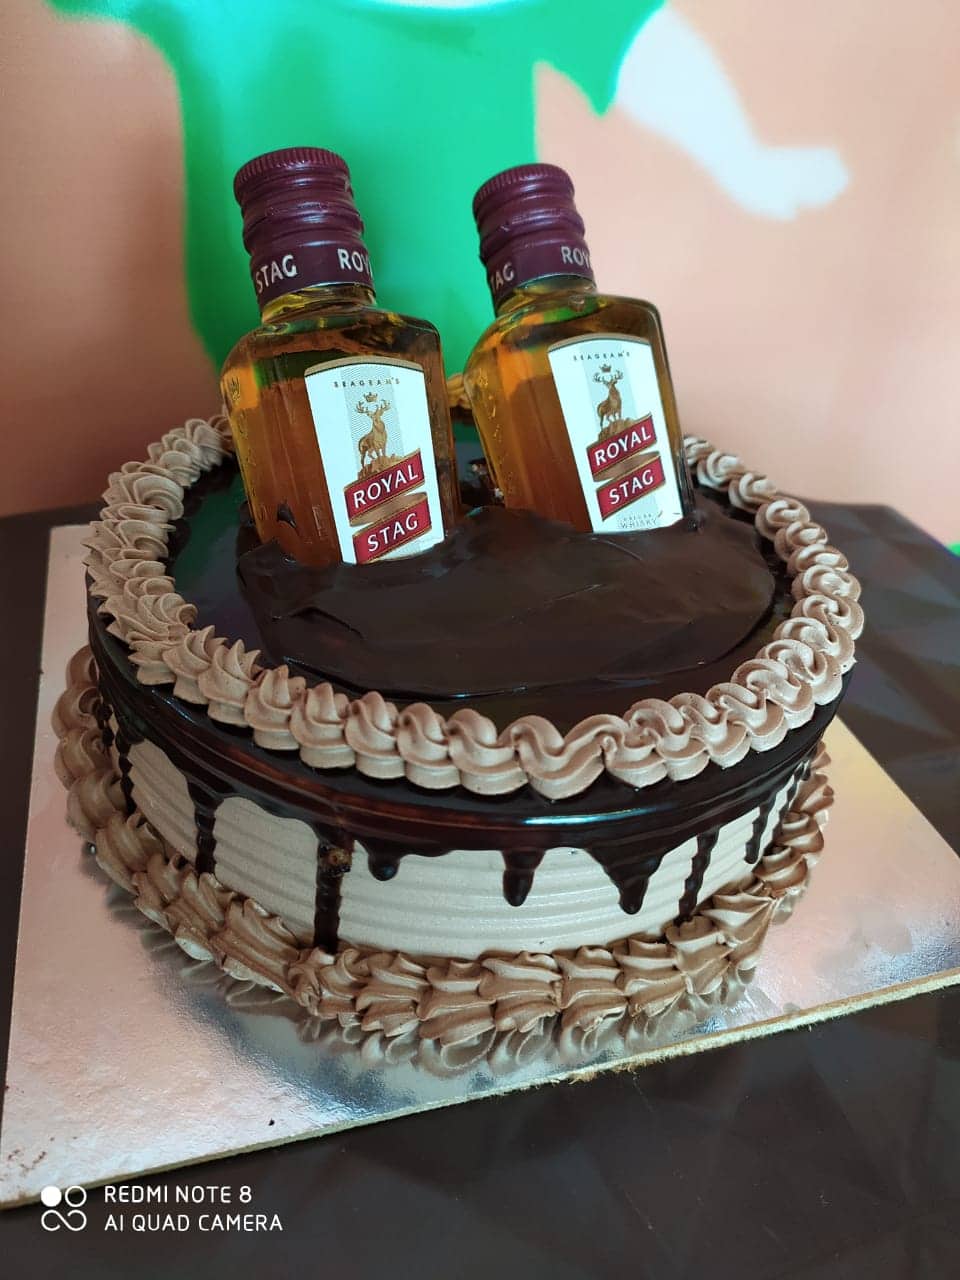 king_bakers_allahabad - 2 Pound Royal stag cake Royal stag - price -580  -750ml Flavour- chocolate Total Amount -1349 Made by king Baker's online  cake service Allahabad To place your order call or whatsapp on 📞  9696344637 | Facebook